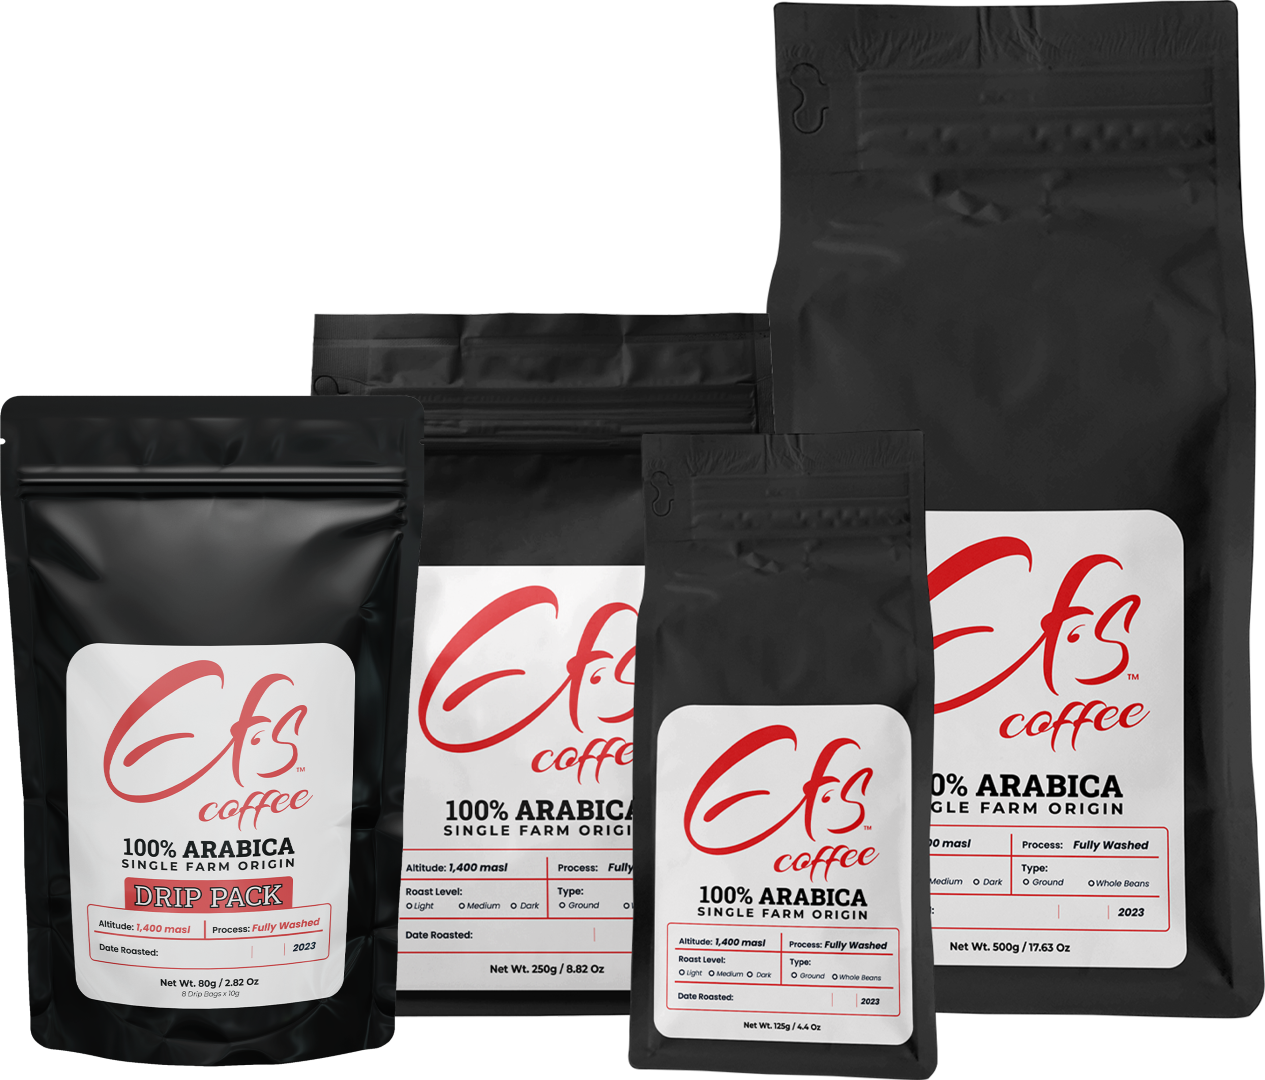 Ef's Coffee | Product photos